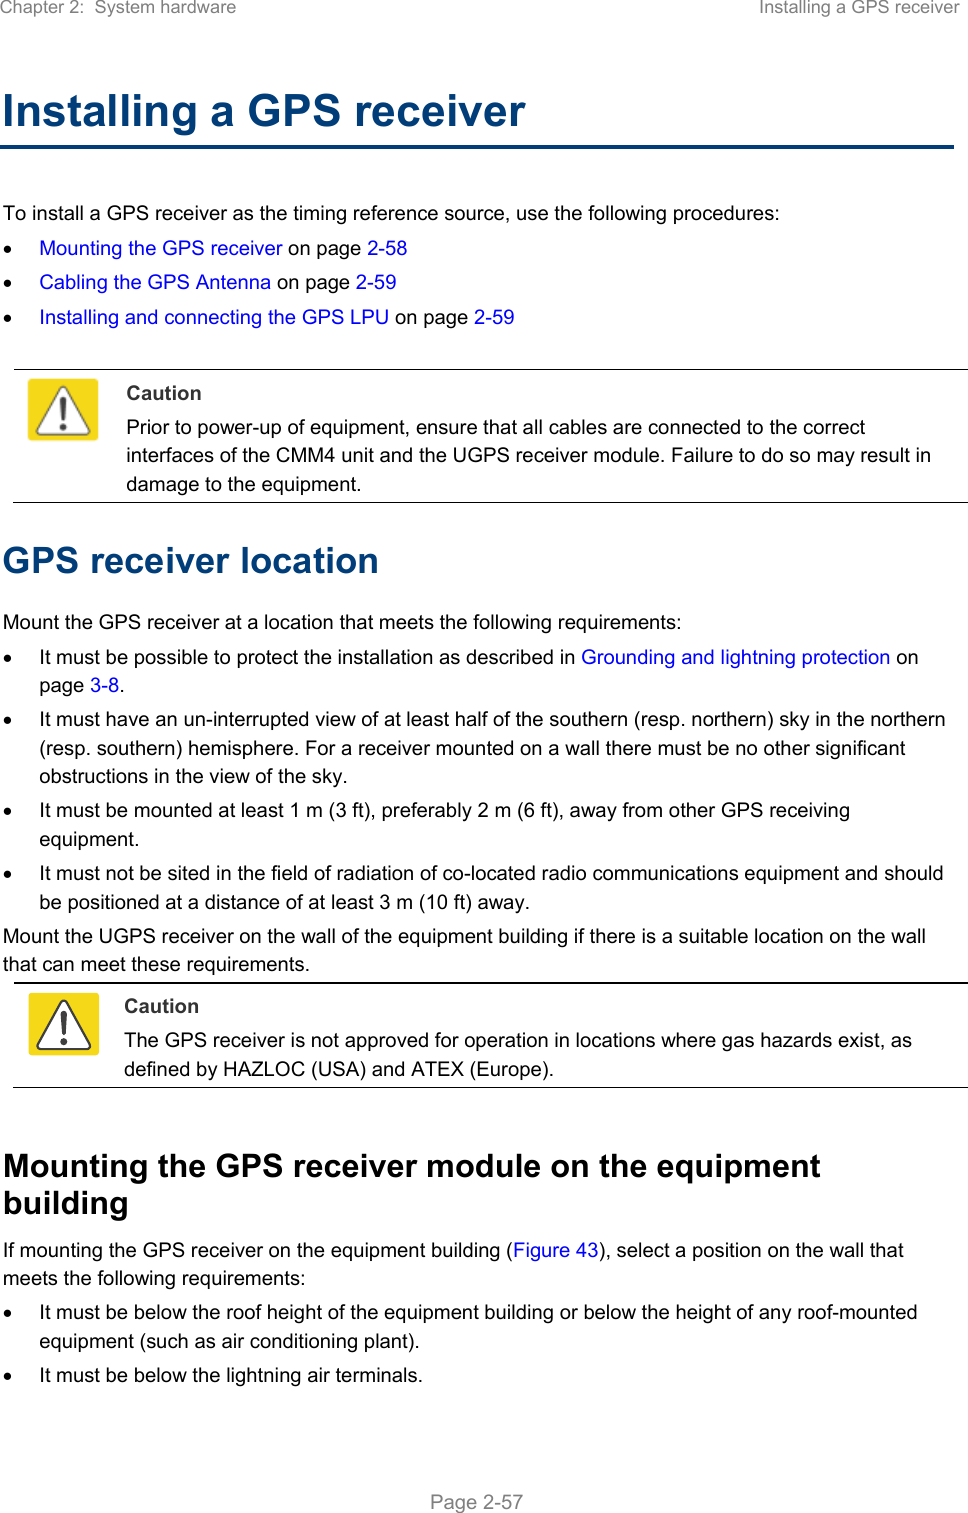 Chapter 2:  System hardware  Installing a GPS receiver   Page 2-57 Installing a GPS receiver  To install a GPS receiver as the timing reference source, use the following procedures:  Mounting the GPS receiver on page 2-58  Cabling the GPS Antenna on page 2-59  Installing and connecting the GPS LPU on page 2-59   Caution Prior to power-up of equipment, ensure that all cables are connected to the correct interfaces of the CMM4 unit and the UGPS receiver module. Failure to do so may result in damage to the equipment. GPS receiver location Mount the GPS receiver at a location that meets the following requirements:   It must be possible to protect the installation as described in Grounding and lightning protection on page 3-8.   It must have an un-interrupted view of at least half of the southern (resp. northern) sky in the northern (resp. southern) hemisphere. For a receiver mounted on a wall there must be no other significant obstructions in the view of the sky.   It must be mounted at least 1 m (3 ft), preferably 2 m (6 ft), away from other GPS receiving equipment.   It must not be sited in the field of radiation of co-located radio communications equipment and should be positioned at a distance of at least 3 m (10 ft) away. Mount the UGPS receiver on the wall of the equipment building if there is a suitable location on the wall that can meet these requirements.   Caution The GPS receiver is not approved for operation in locations where gas hazards exist, as defined by HAZLOC (USA) and ATEX (Europe).  Mounting the GPS receiver module on the equipment building If mounting the GPS receiver on the equipment building (Figure 43), select a position on the wall that meets the following requirements:   It must be below the roof height of the equipment building or below the height of any roof-mounted equipment (such as air conditioning plant).   It must be below the lightning air terminals. 